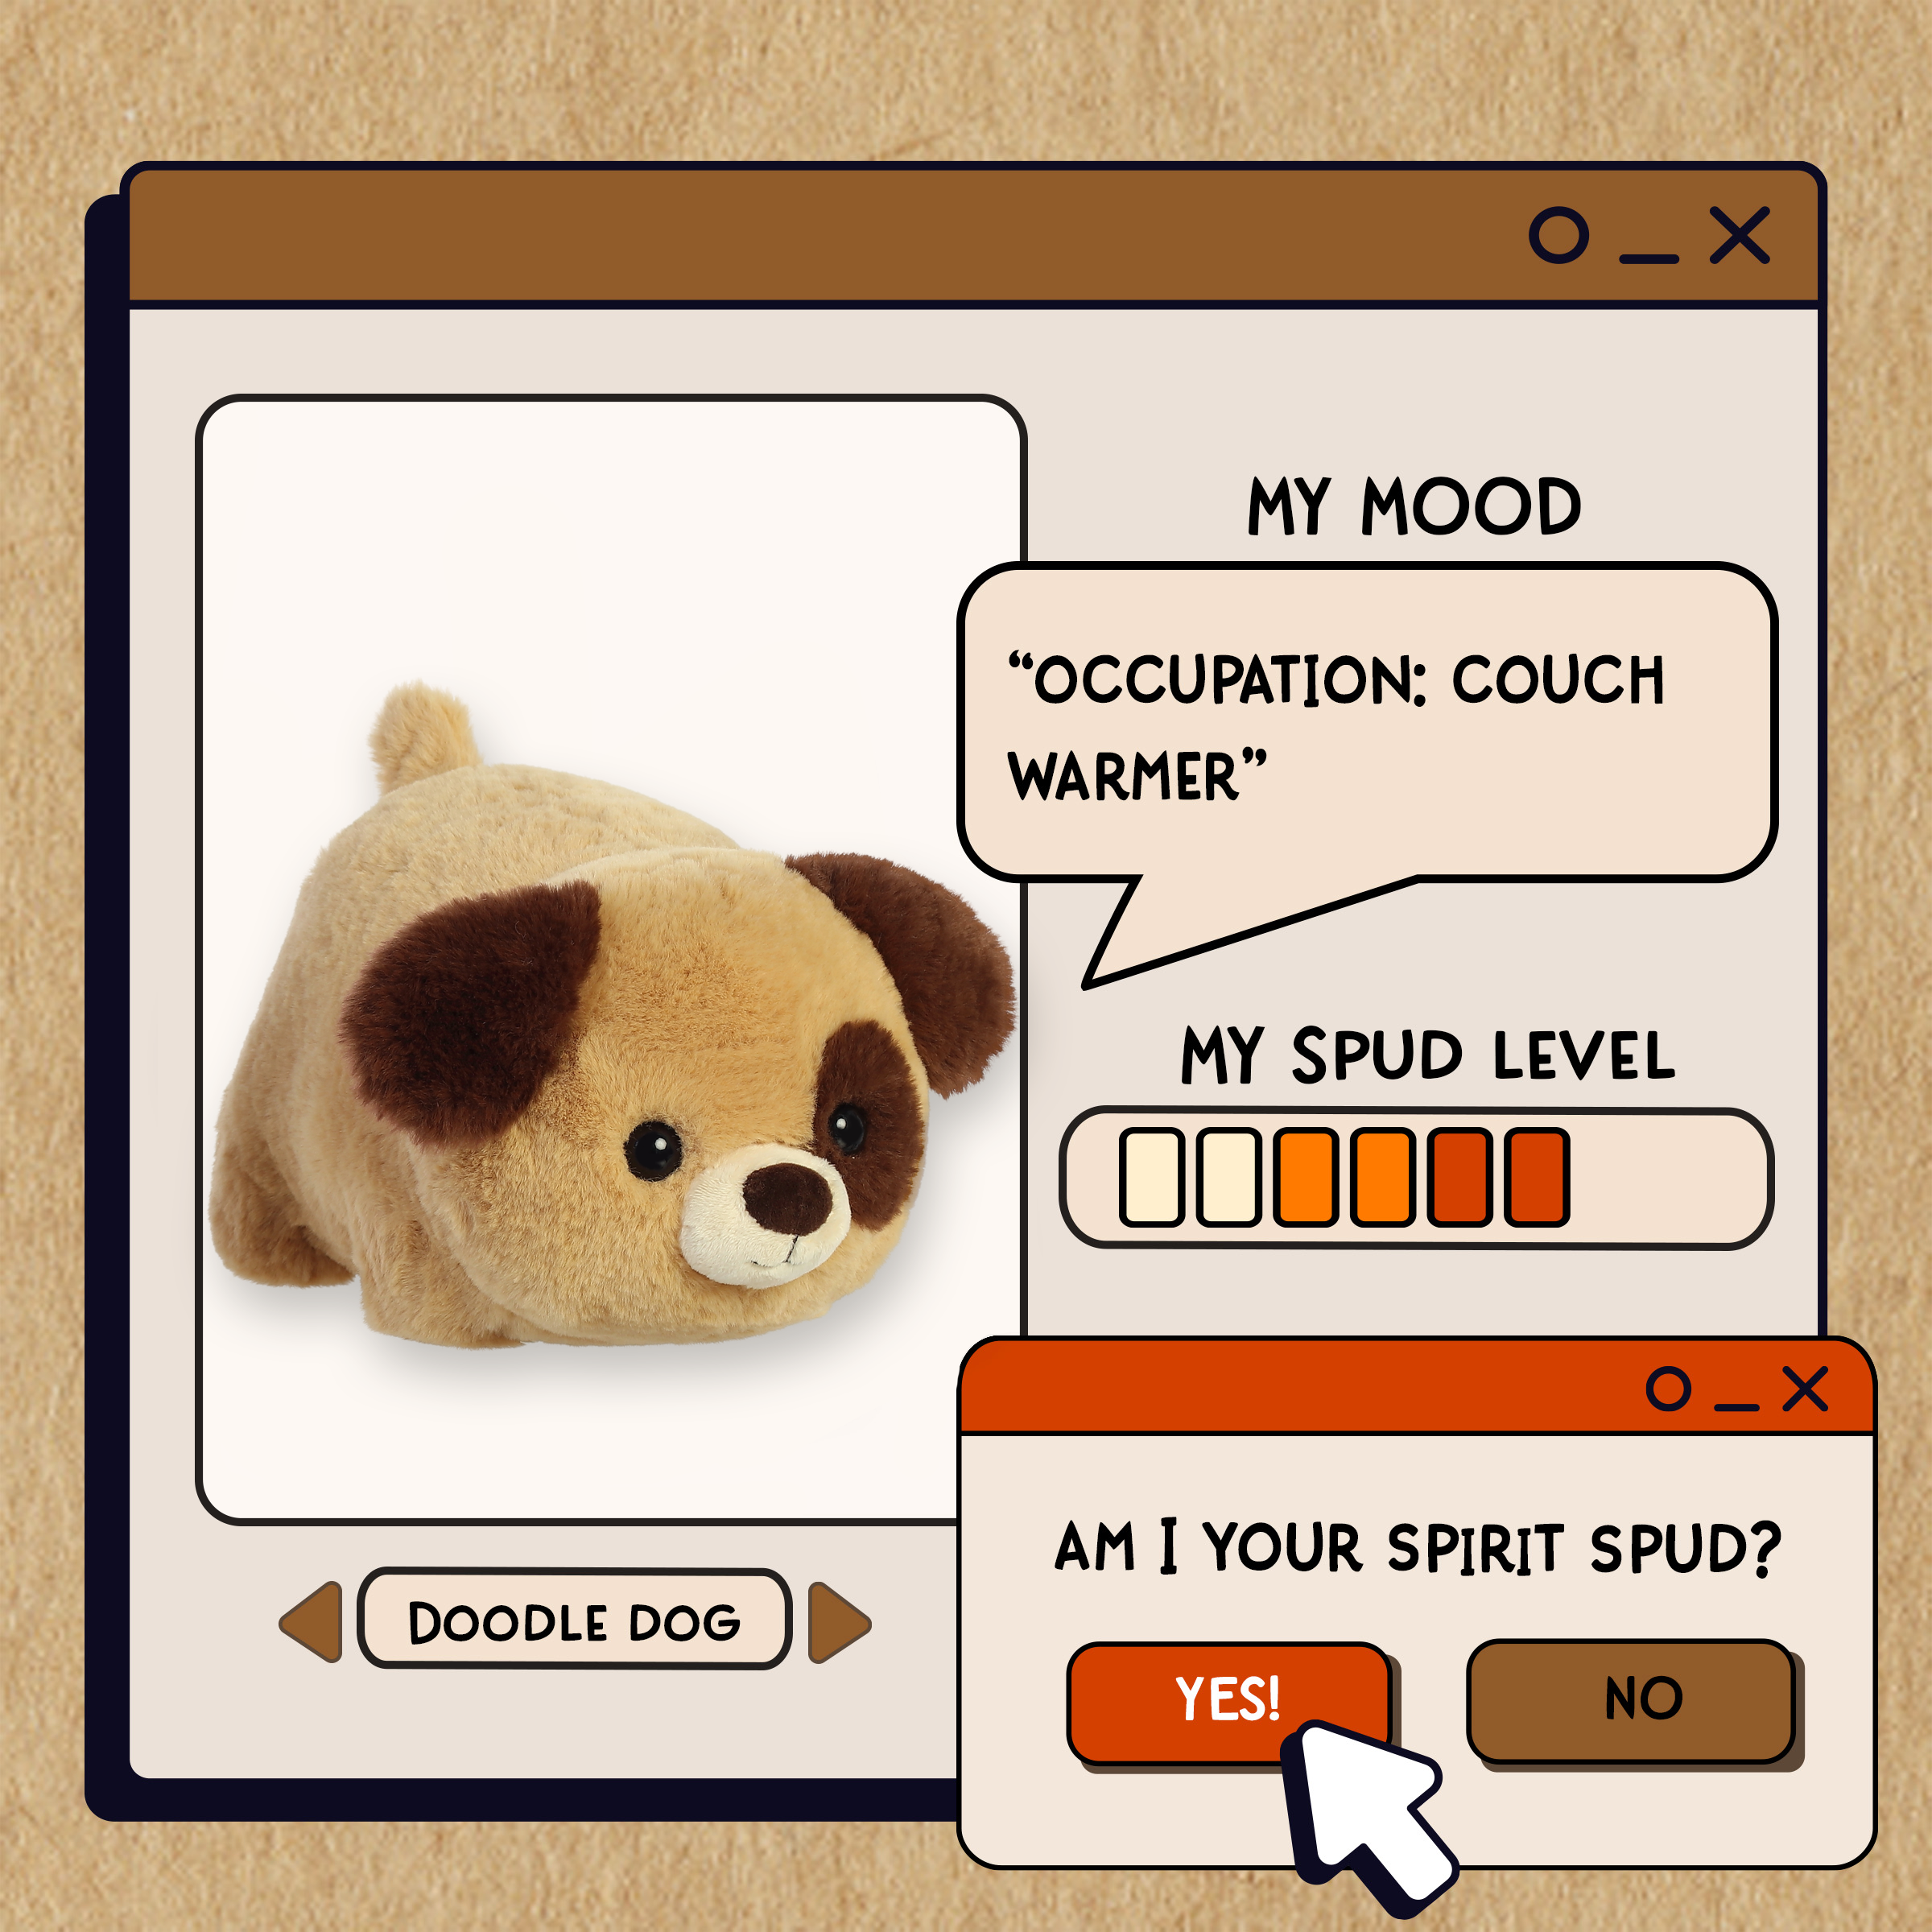 A spudsters product card for the doodle dog plush by Aurora